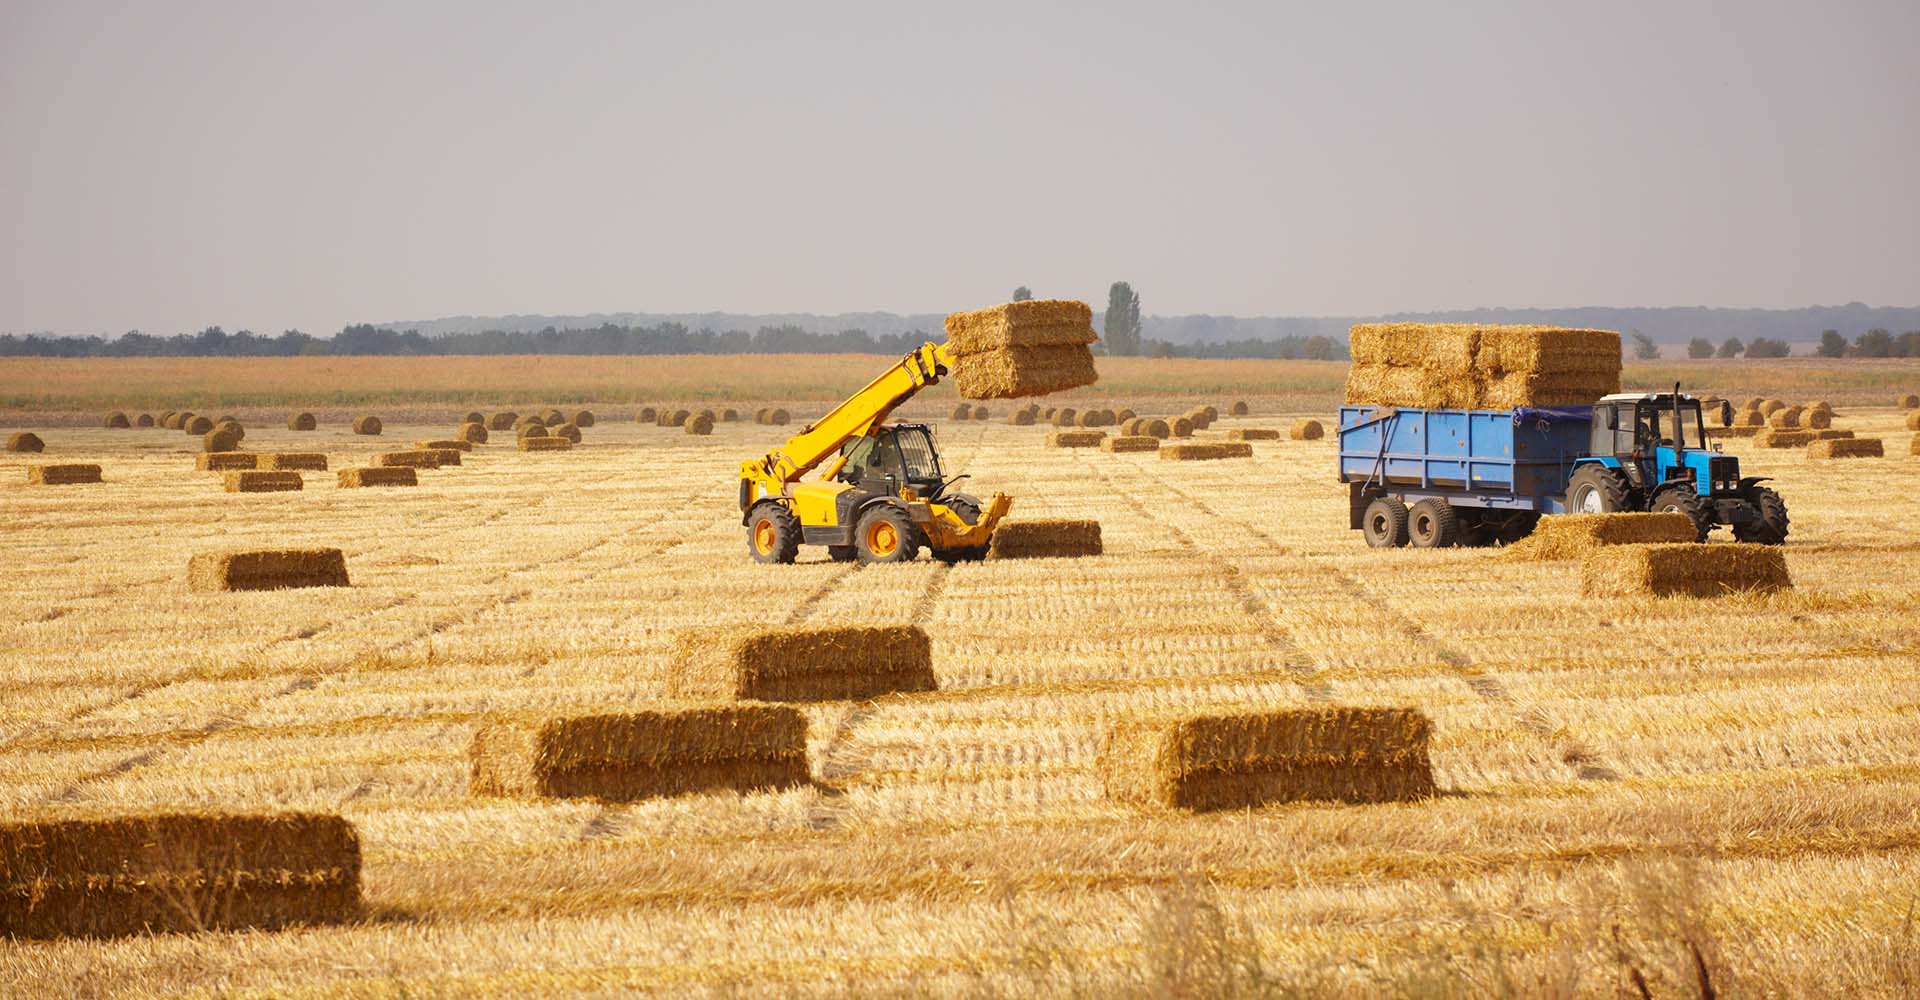 011_0000_tractor-loads-dry-haystacks-on-to-the-trailer-2021-10-21-18-47-54-utc